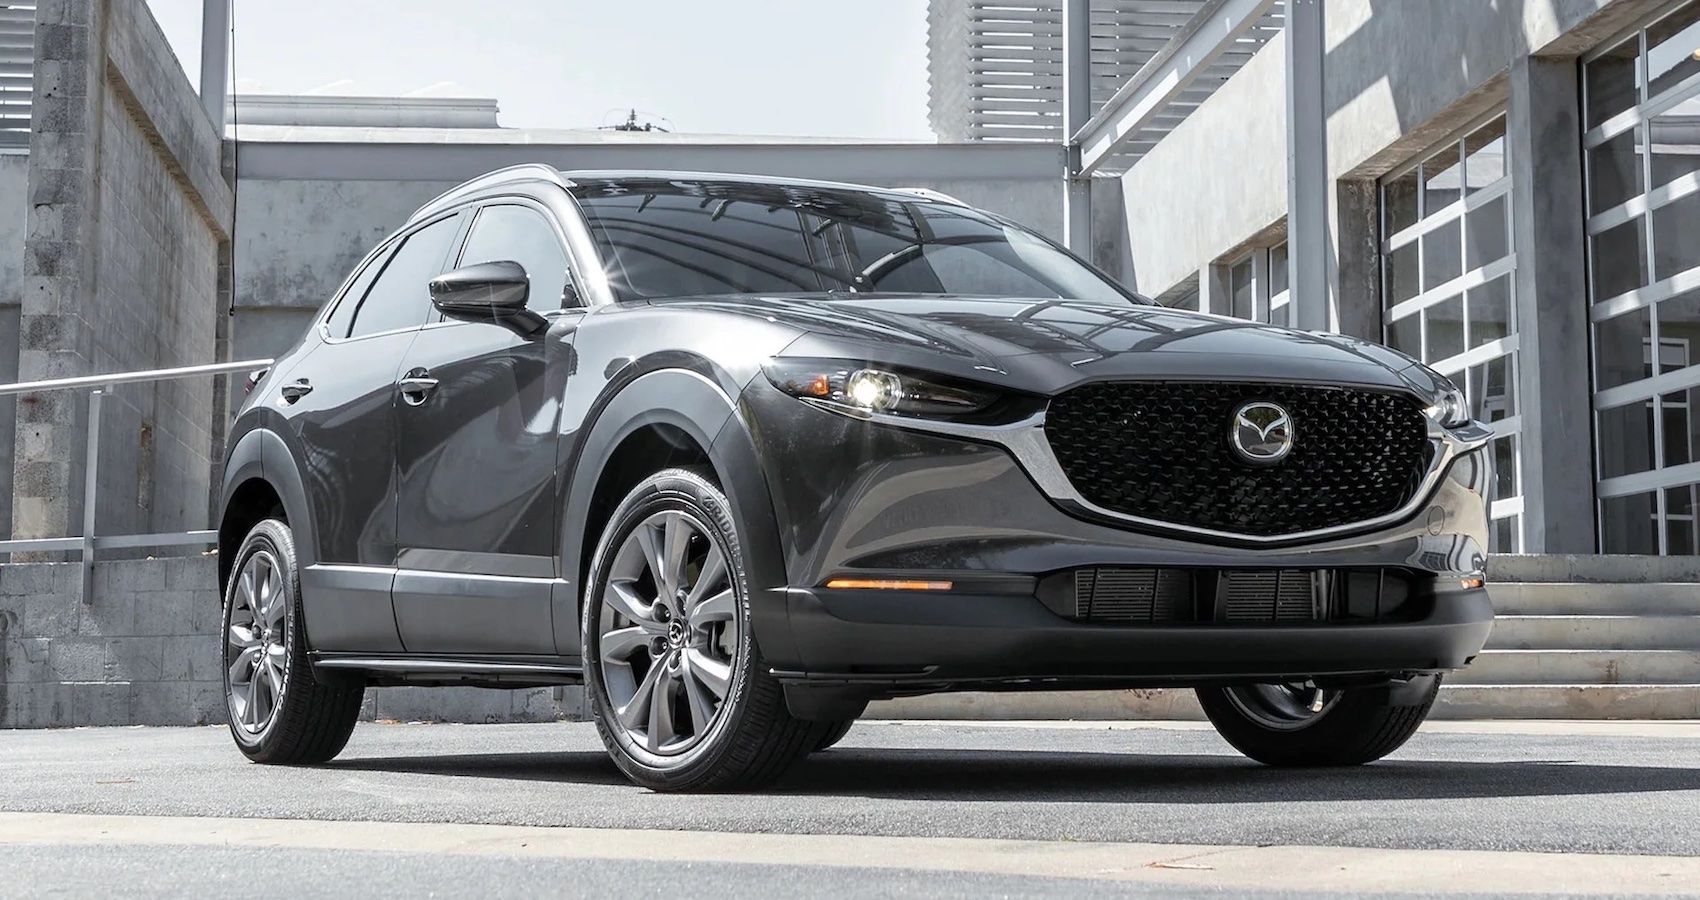 katolsk Jeg klager stilhed Here's Why The 2022 Mazda CX-30 Turbo Is The Perfect Crossover For Driving  Enthusiasts